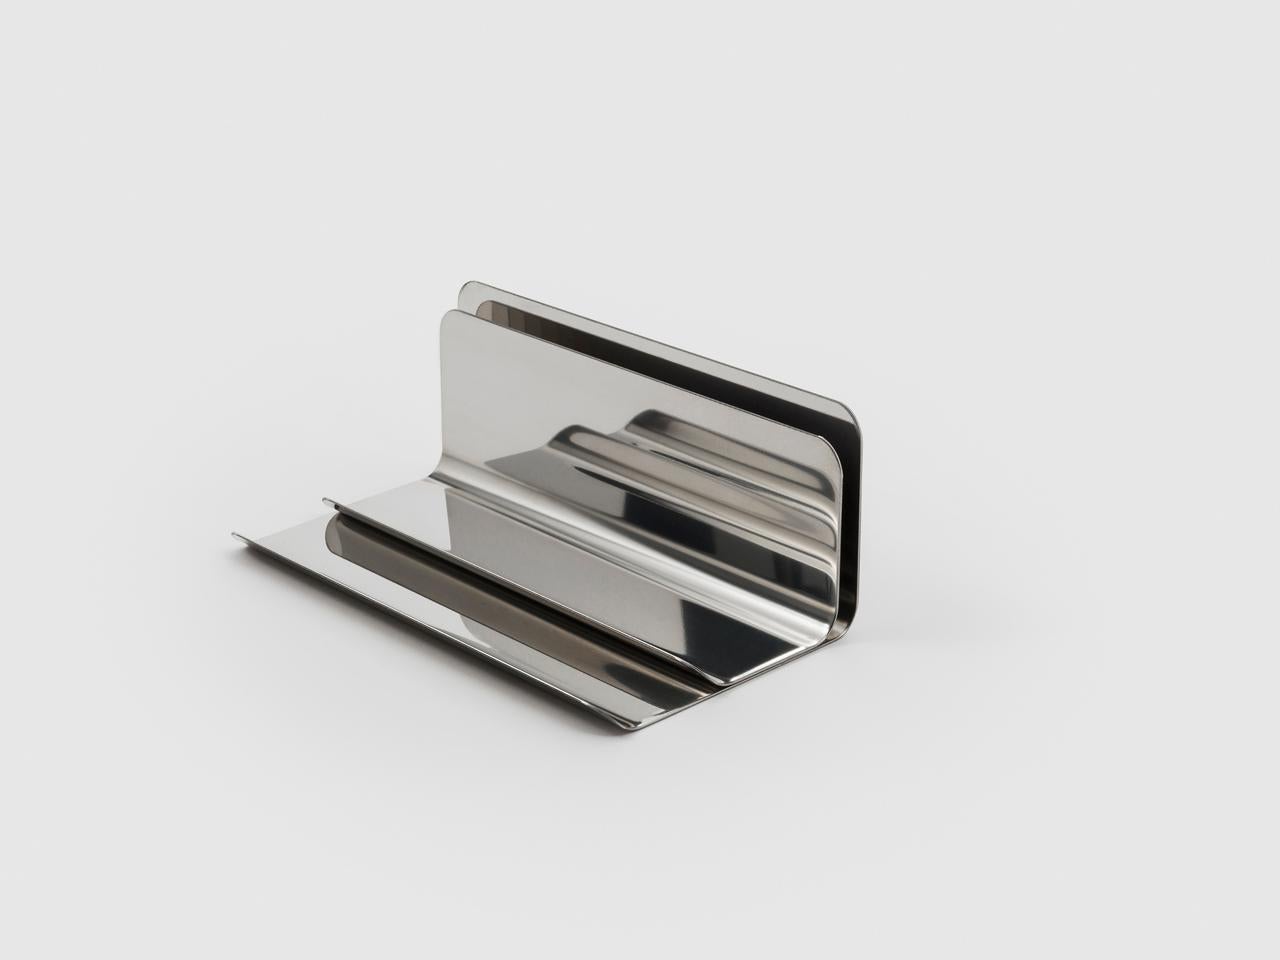 Ventotene is a lettertray and pencil holder rolled into one. It combines both design and functionalism in one useful and attractive everyday object made of polished stainless steel.

Enzo Mari is one of the masters of Italian Design. He was born